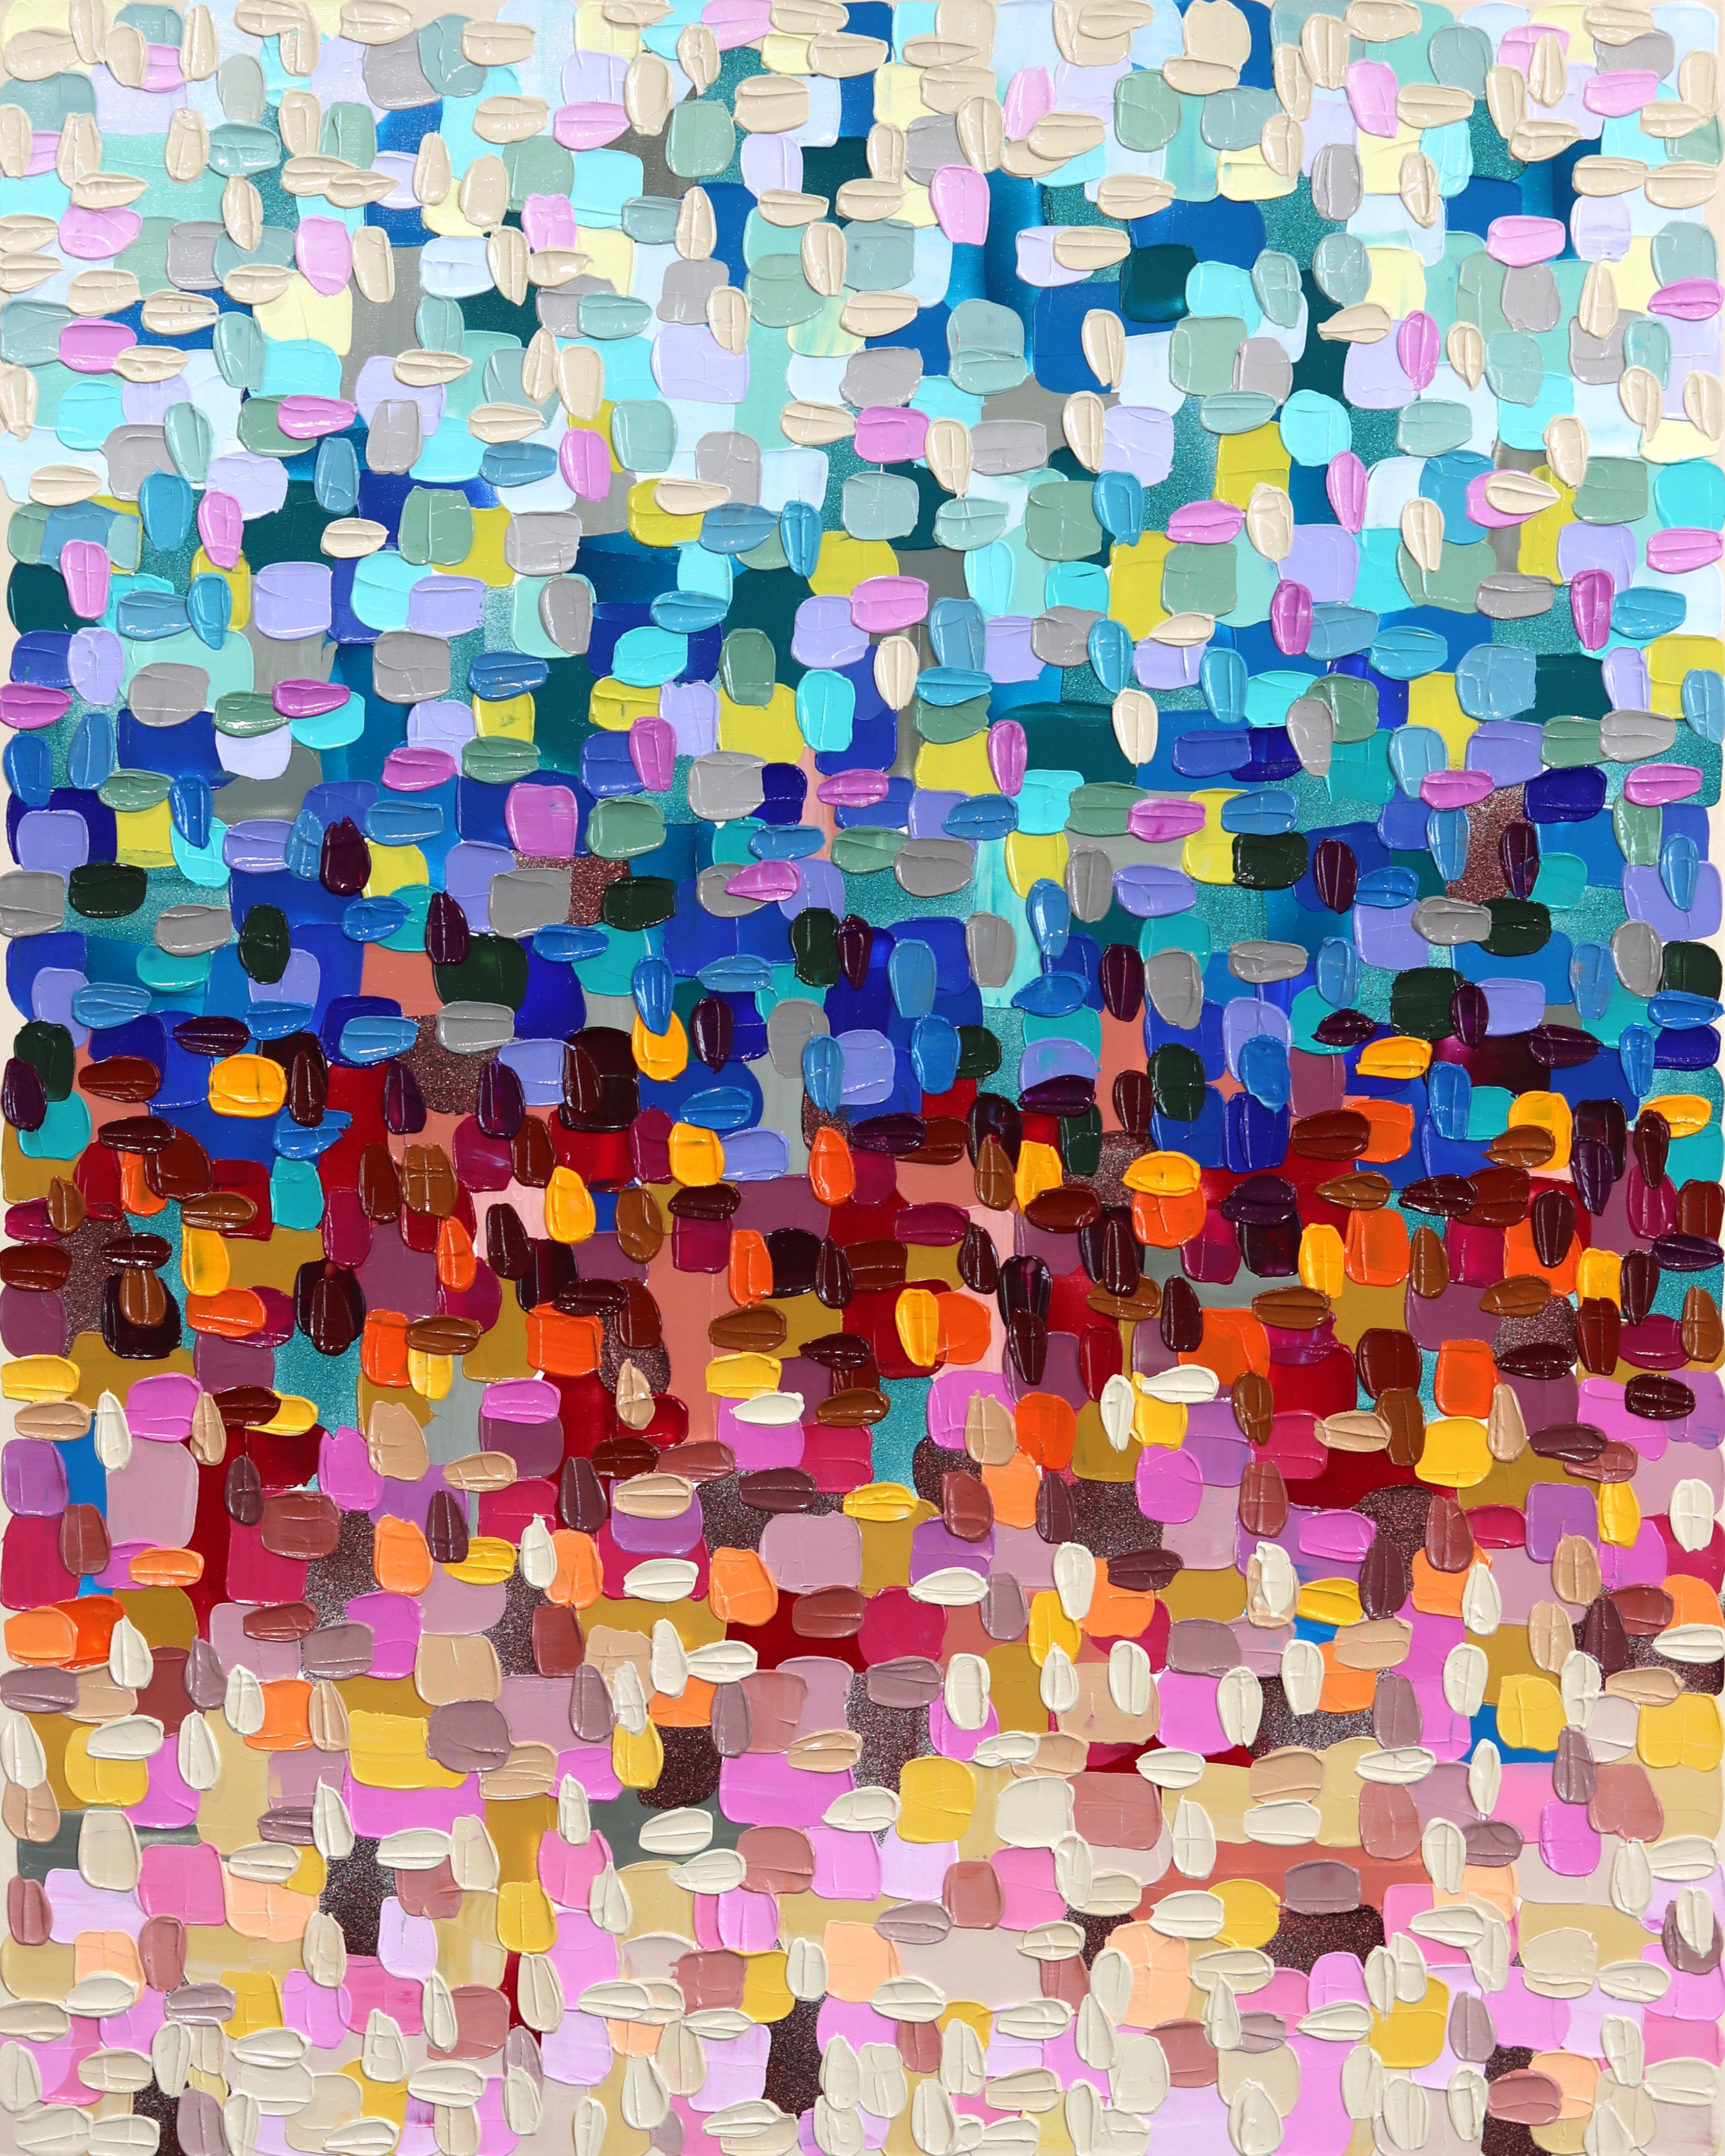 Impasto-painted strokes of bright colors are the framework of artist Shiri Phillips’ abstract artworks. Her paintings are flooded with texture through the layering of acrylic paint in fluent brushstrokes. Inspired by the vibrant surroundings she